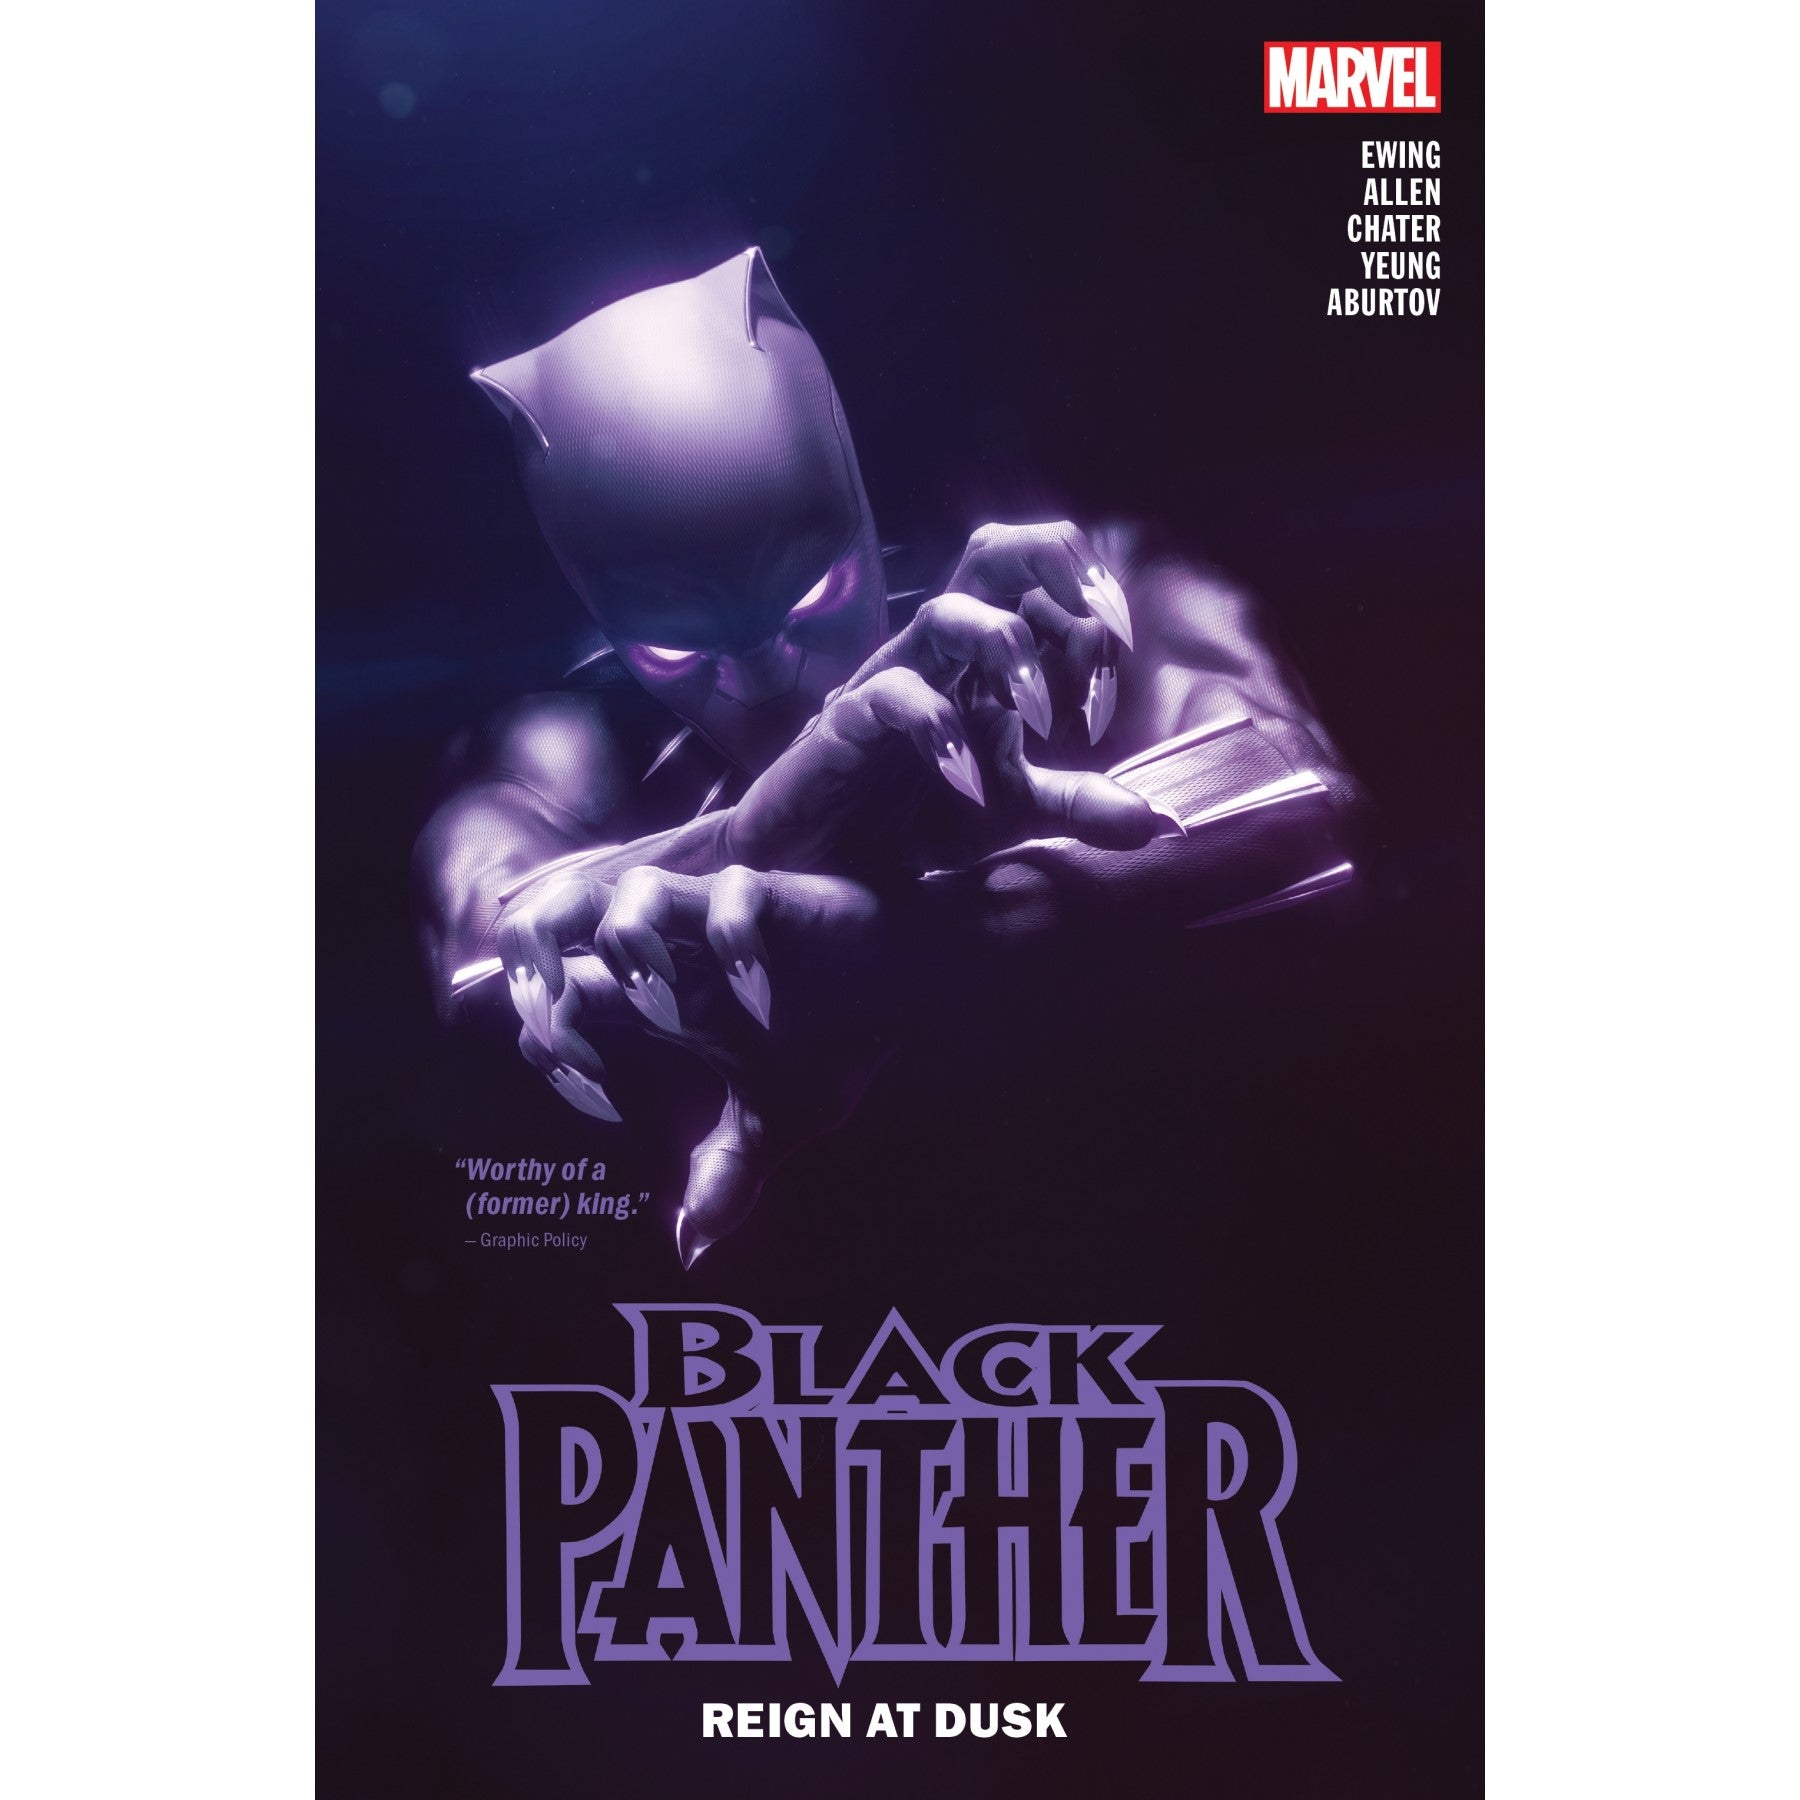 Black Panther By Eve L. Ewing Reign At Dusk Vol. 1